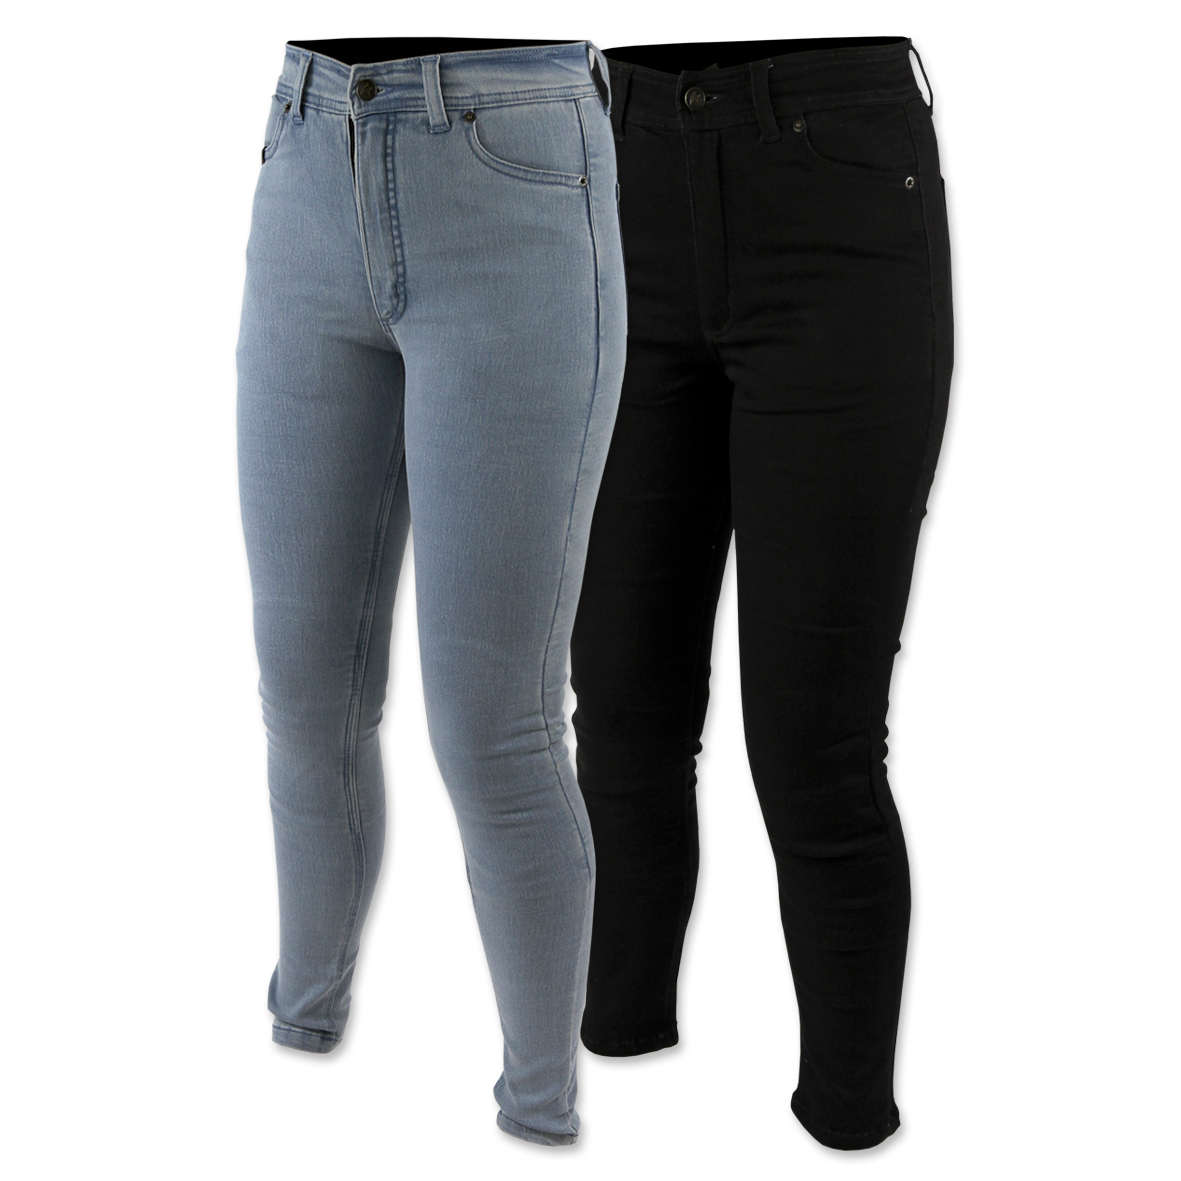 Shark Ladies Protective Jeggings